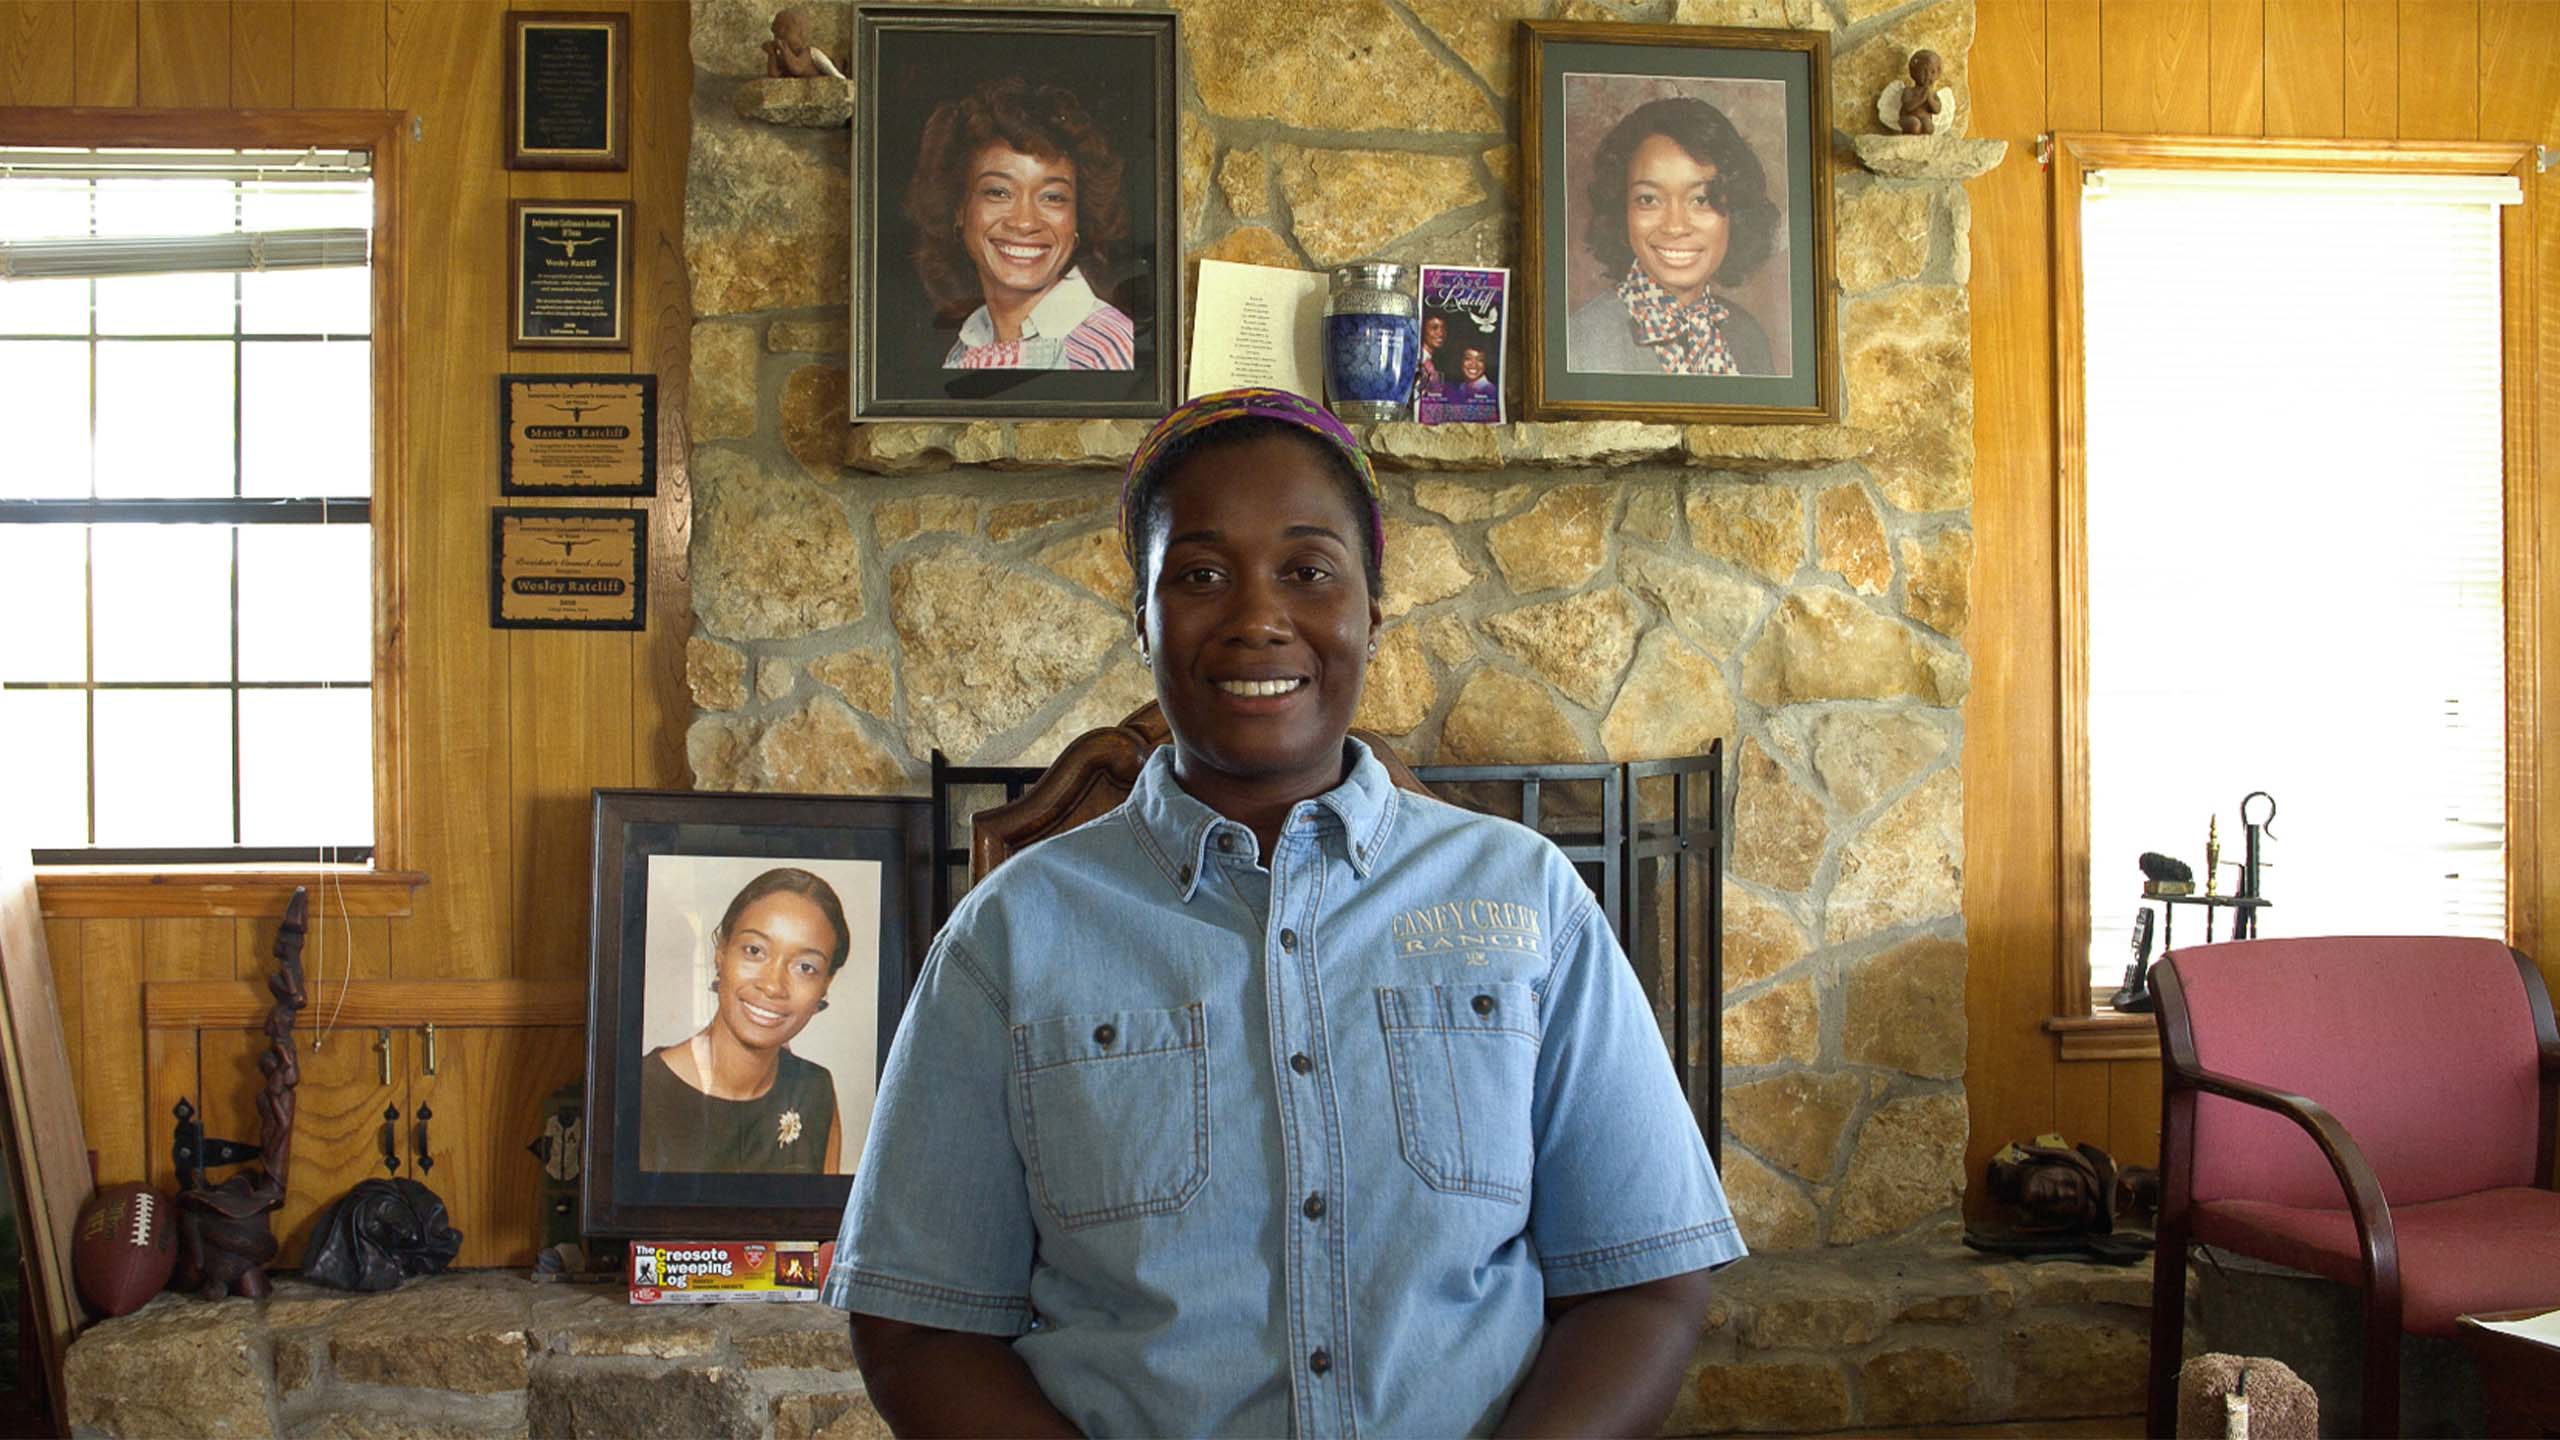 Kimberly Ratcliff pictured in front of photos of her late mother. July 2019